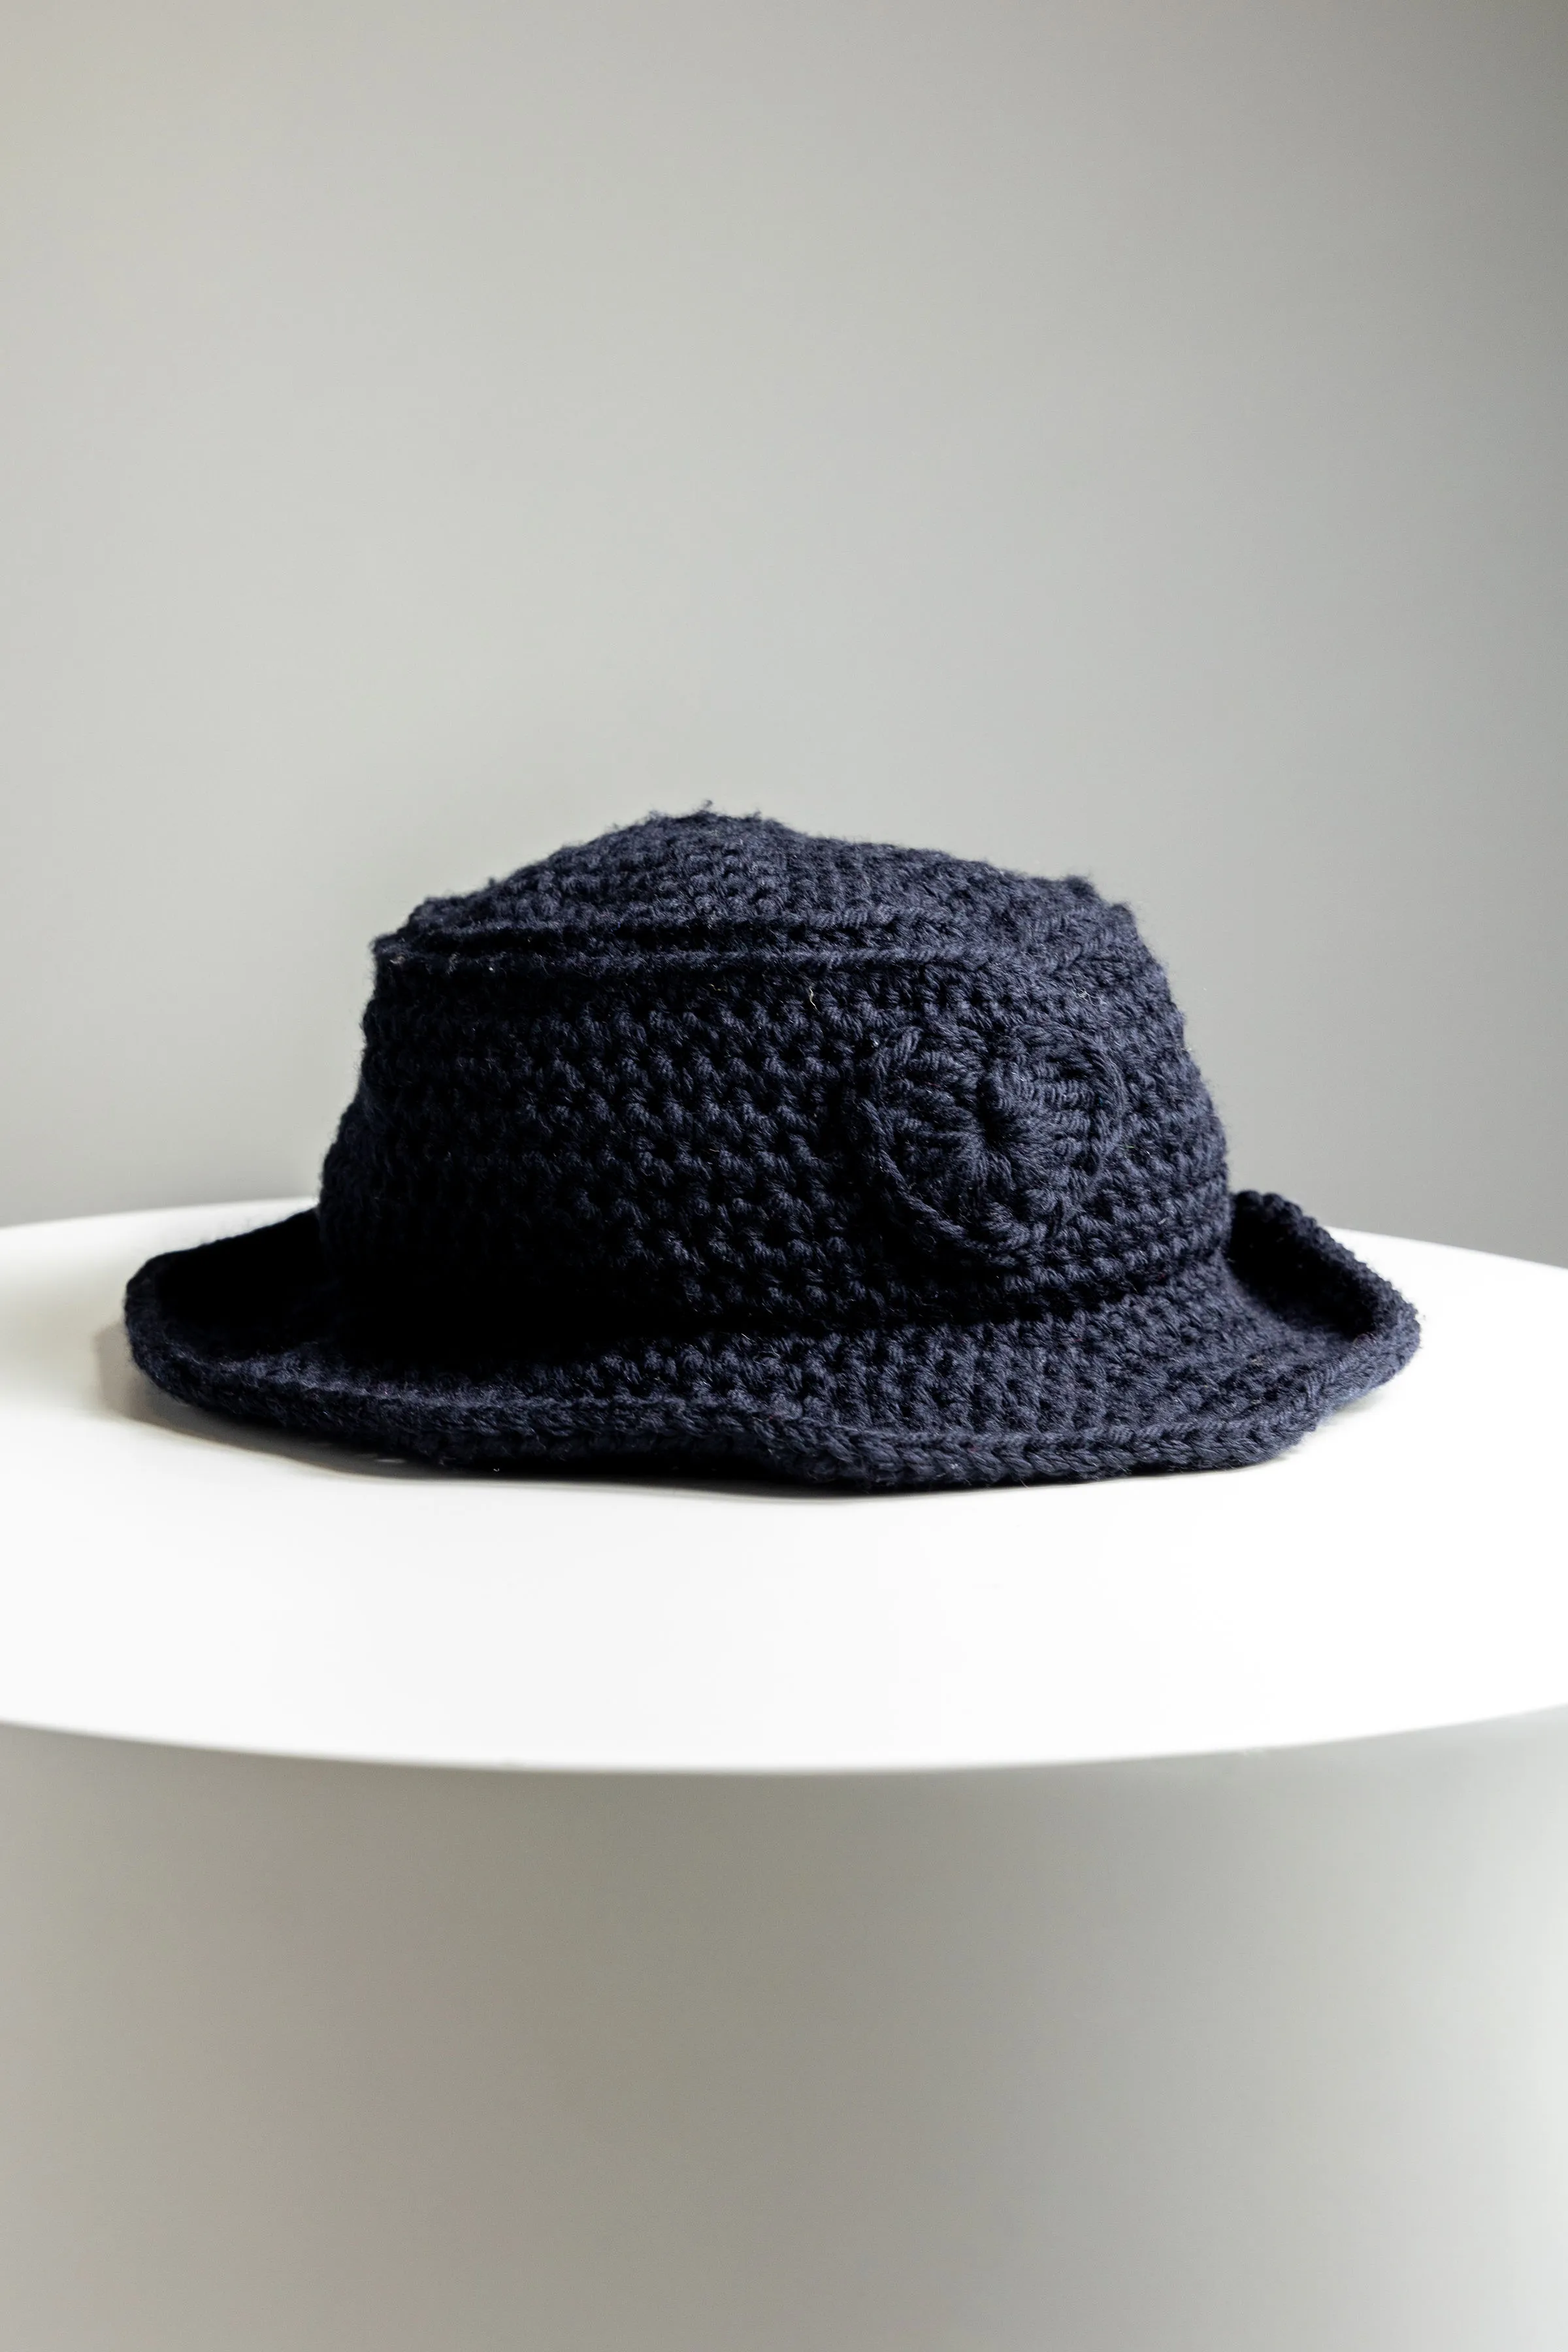 Bucket hat by Mamé